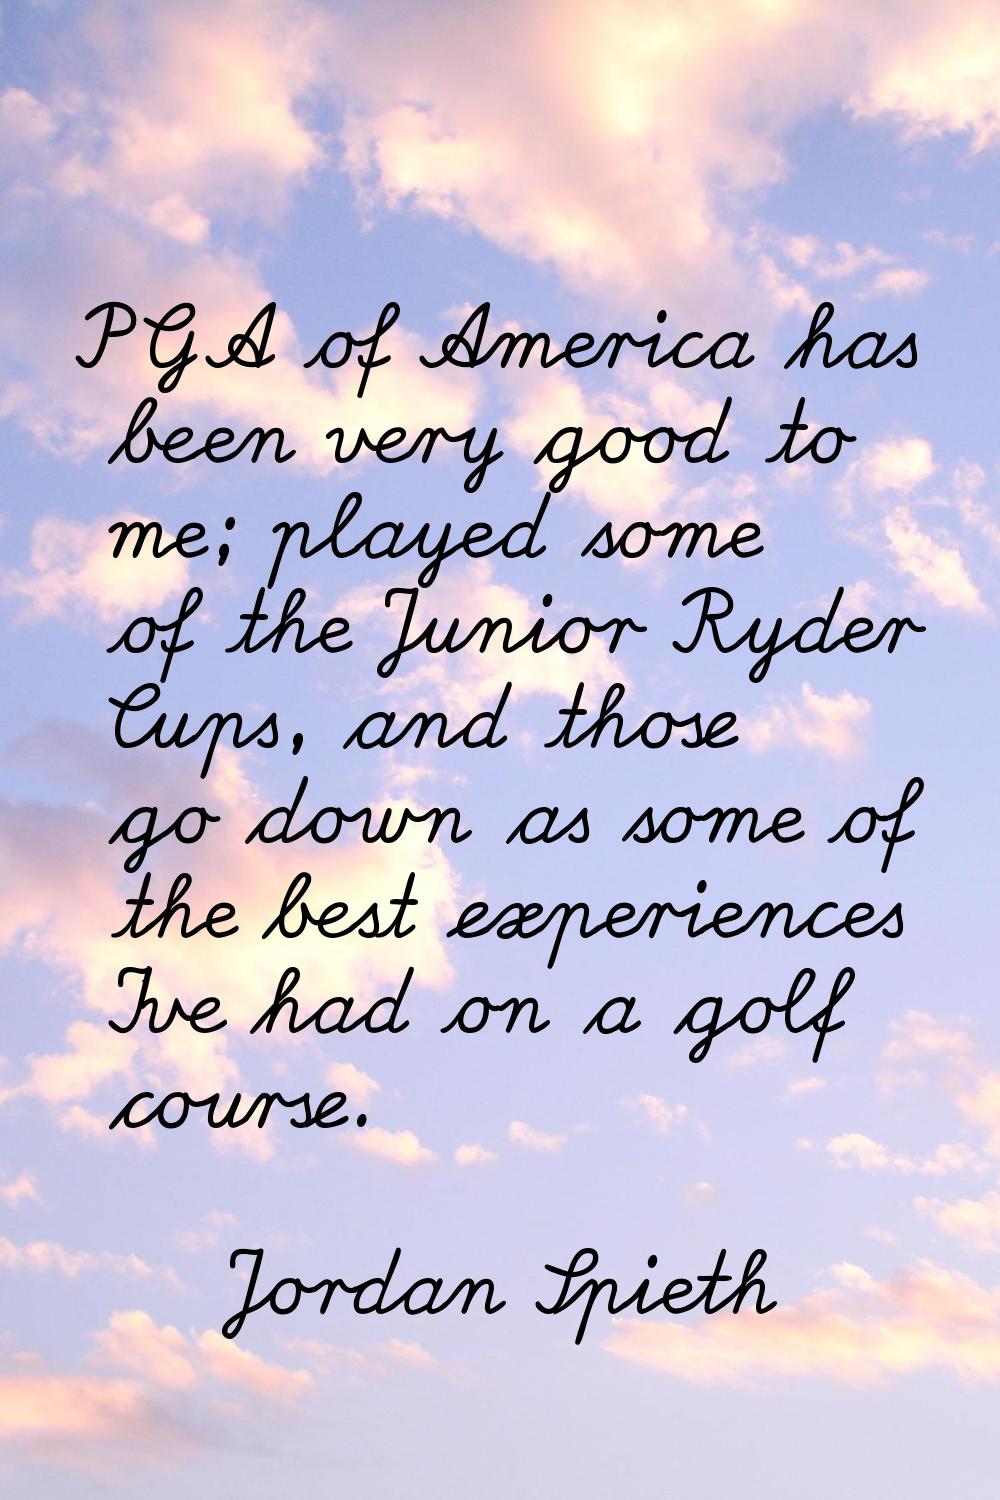 PGA of America has been very good to me; played some of the Junior Ryder Cups, and those go down as